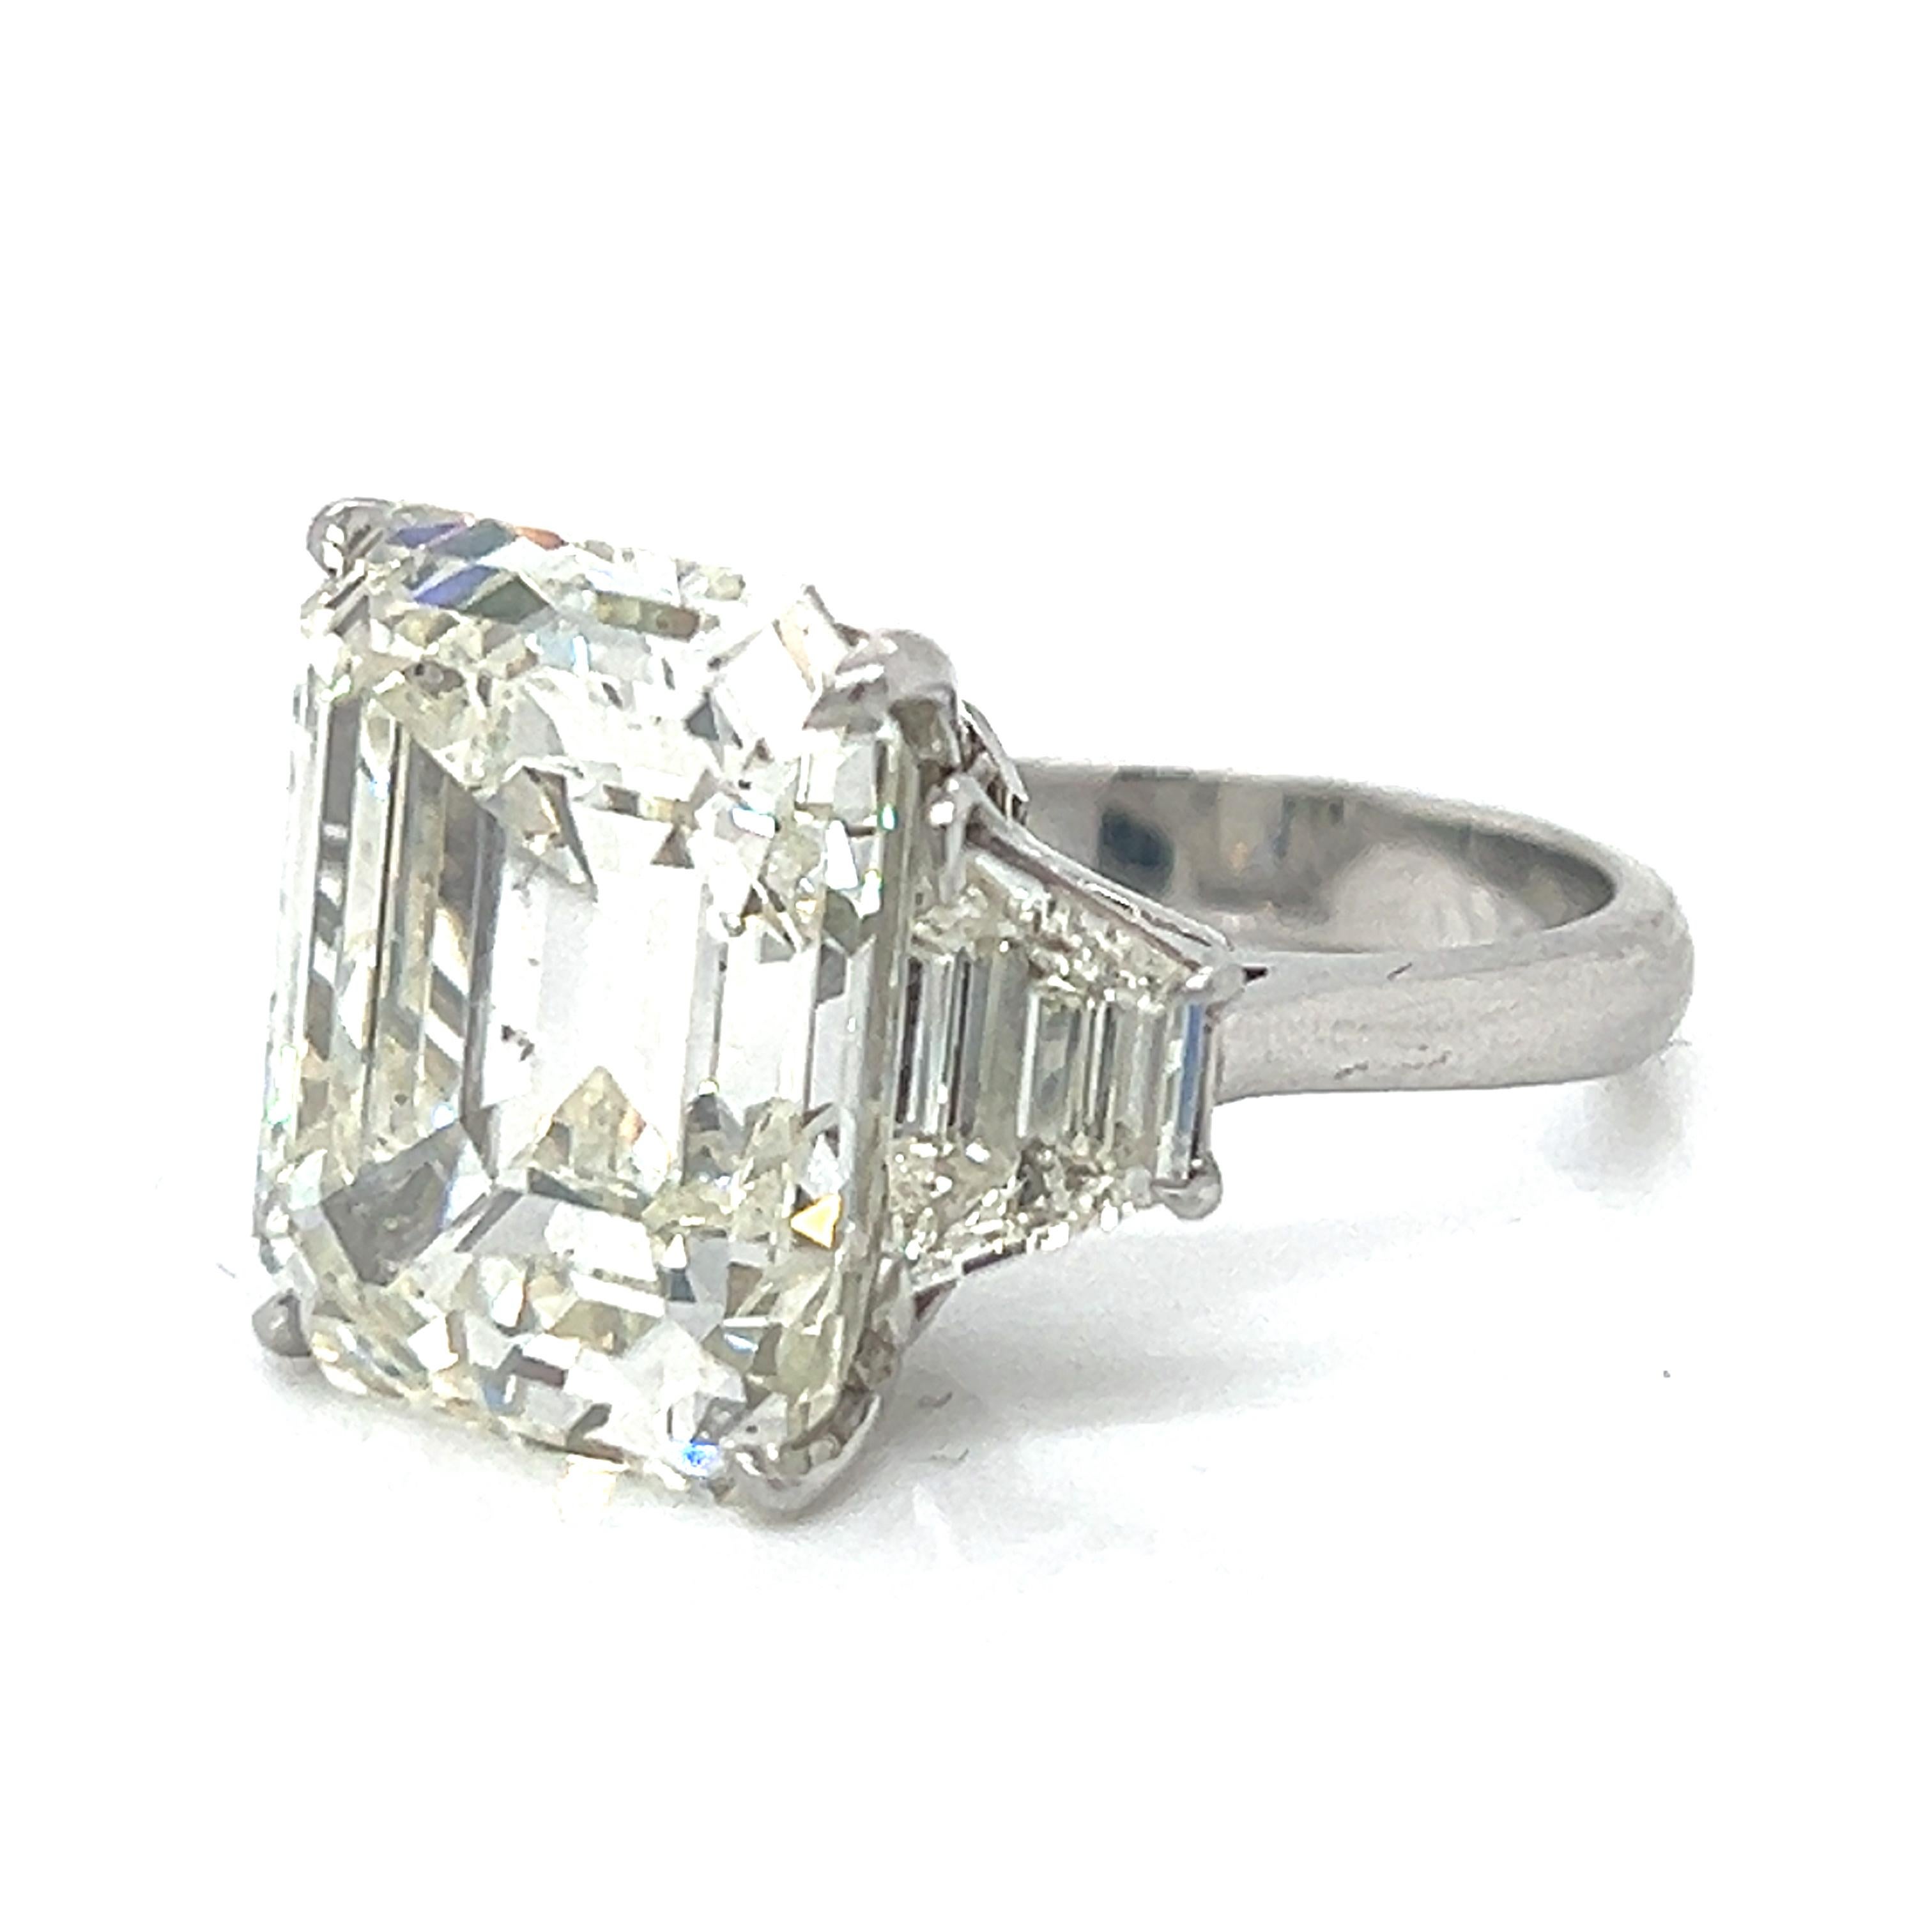 Platinum GIA Certified 15.22 Ct. Diamond Ring
Weighing 11.1 grams

Set with a GIA Certified 15.22 Ct. Emerald-cut Diamond
M Color, SI2 Clarity
GIA#2193901194

Along with 2 Diamonds weighing app. 1.40 Ct.
M-N Color, VS1-SI1 Clarity

This is a